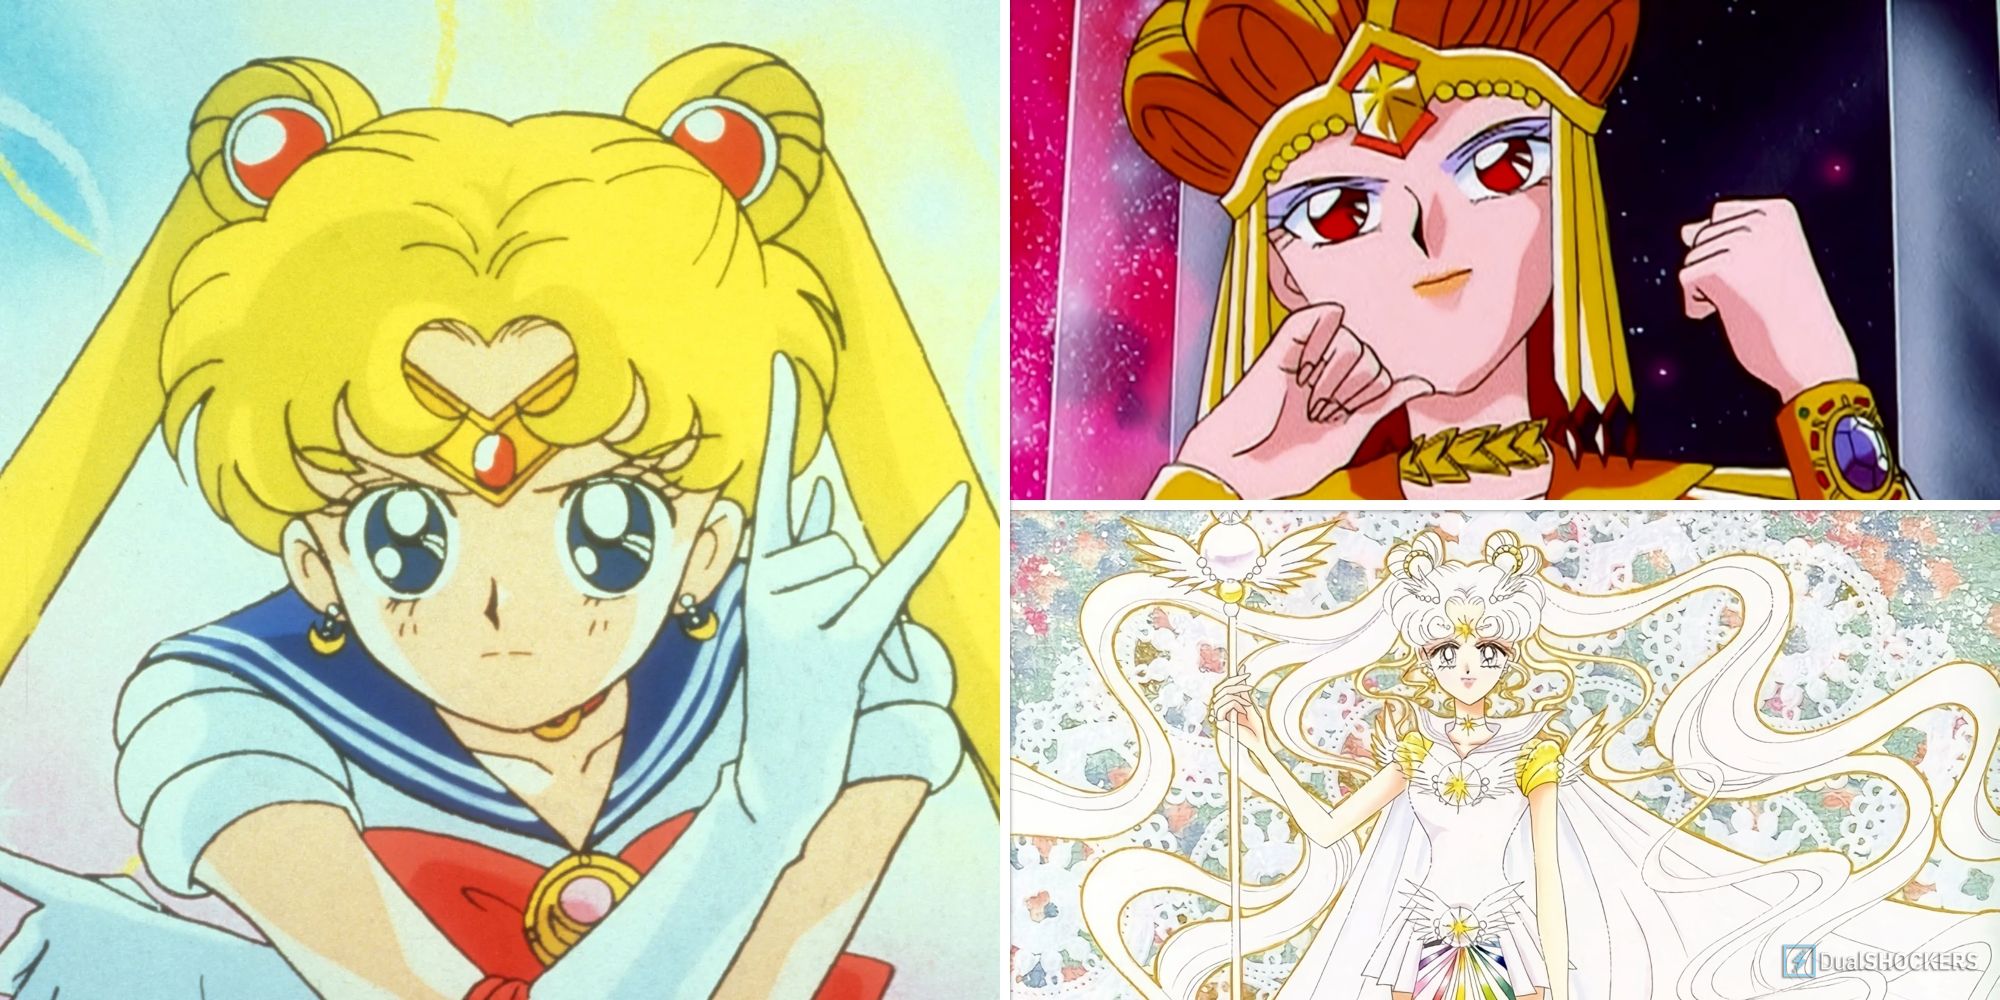 Sailor Moon - The Complete 90s Anime: Exclusive Digital Offer